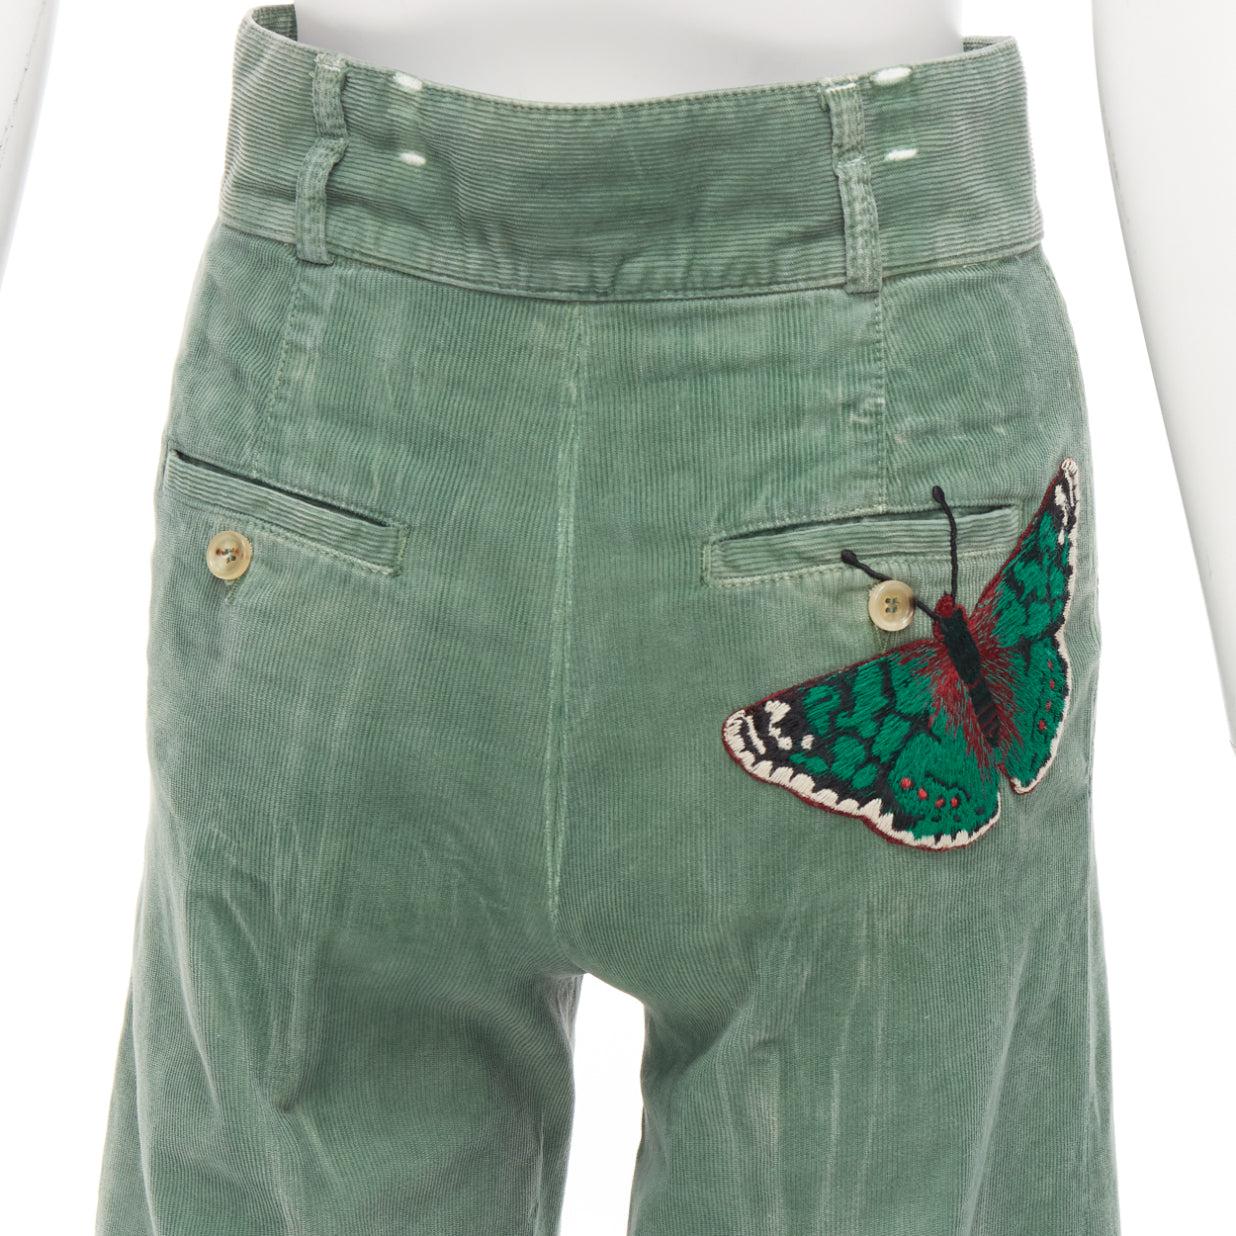 GUCCI green washed corduroy butterfly patch pocket wide leg pants
Reference: NKLL/A00206
Brand: Gucci
Designer: Alessandro Michele
Material: Corduroy
Pattern: Solid
Closure: Zip Fly
Extra Details: Green butterfly patch at right back pocket. Washed